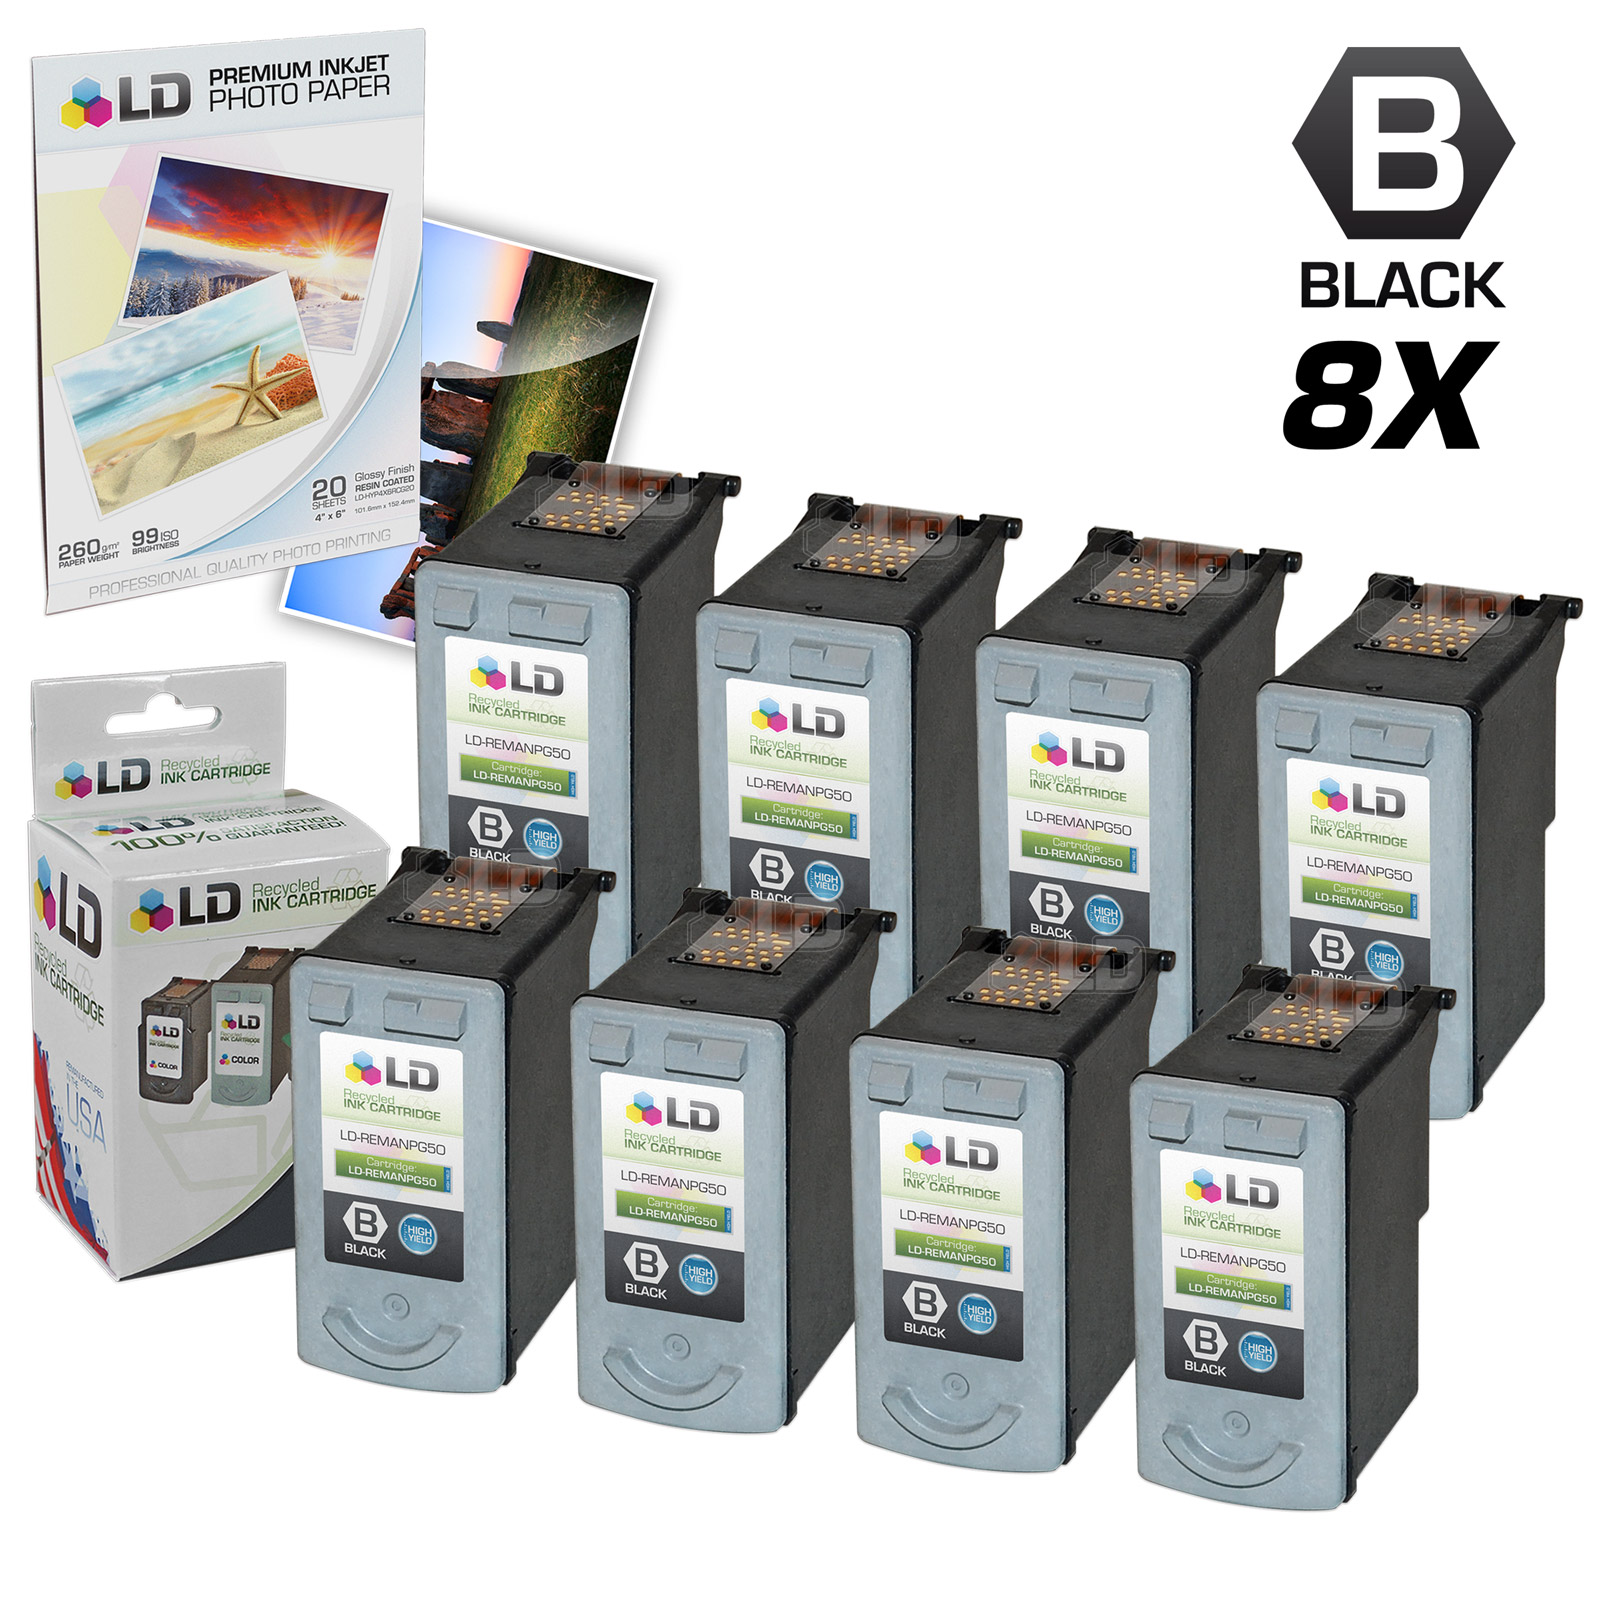 LD Remanufactured Cartridge Replacement for Canon PG50 High Capacity (Pigment Black, 8-Pack) - image 1 of 1